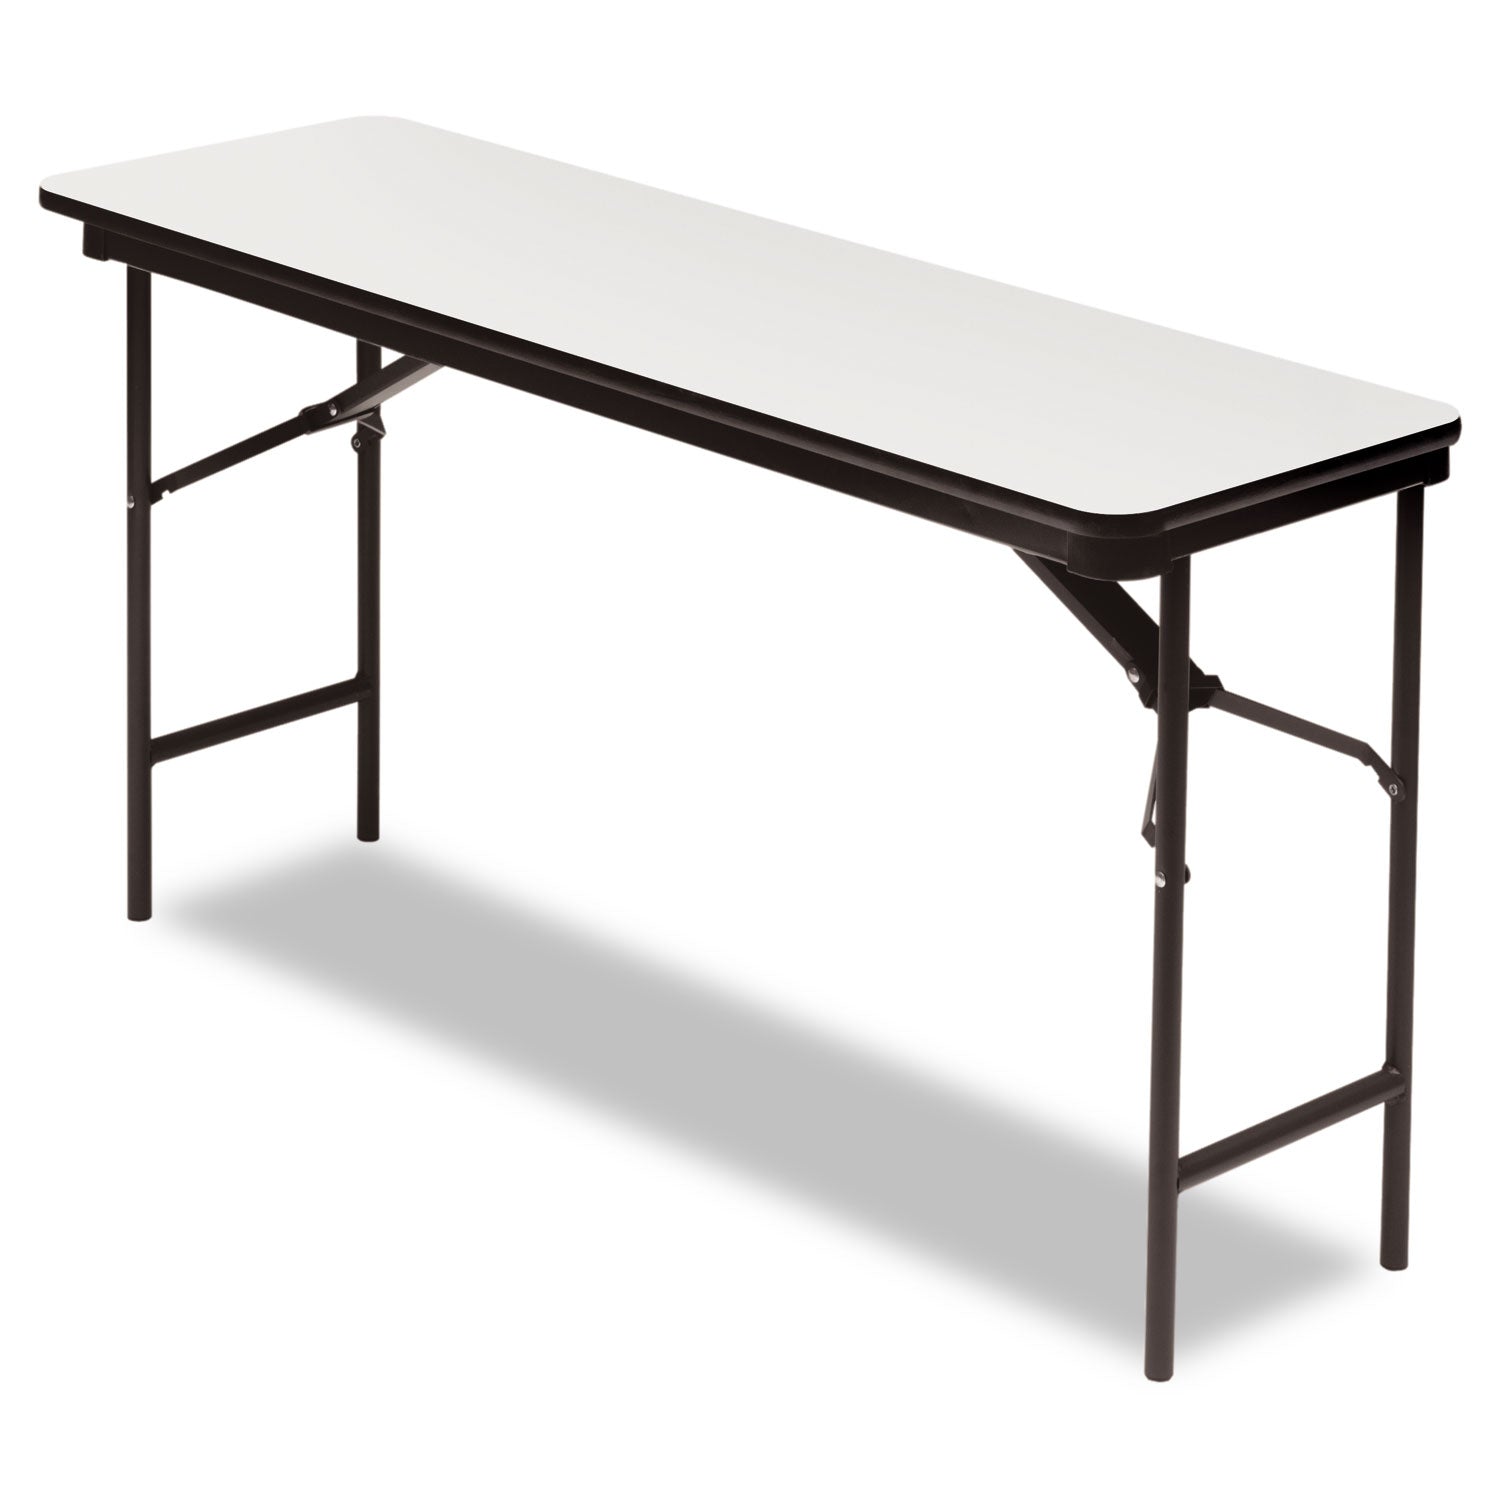 OfficeWorks Commercial Wood-Laminate Folding Table, Rectangular, 60" x 18" x 29", Gray Top, Charcoal Base - 